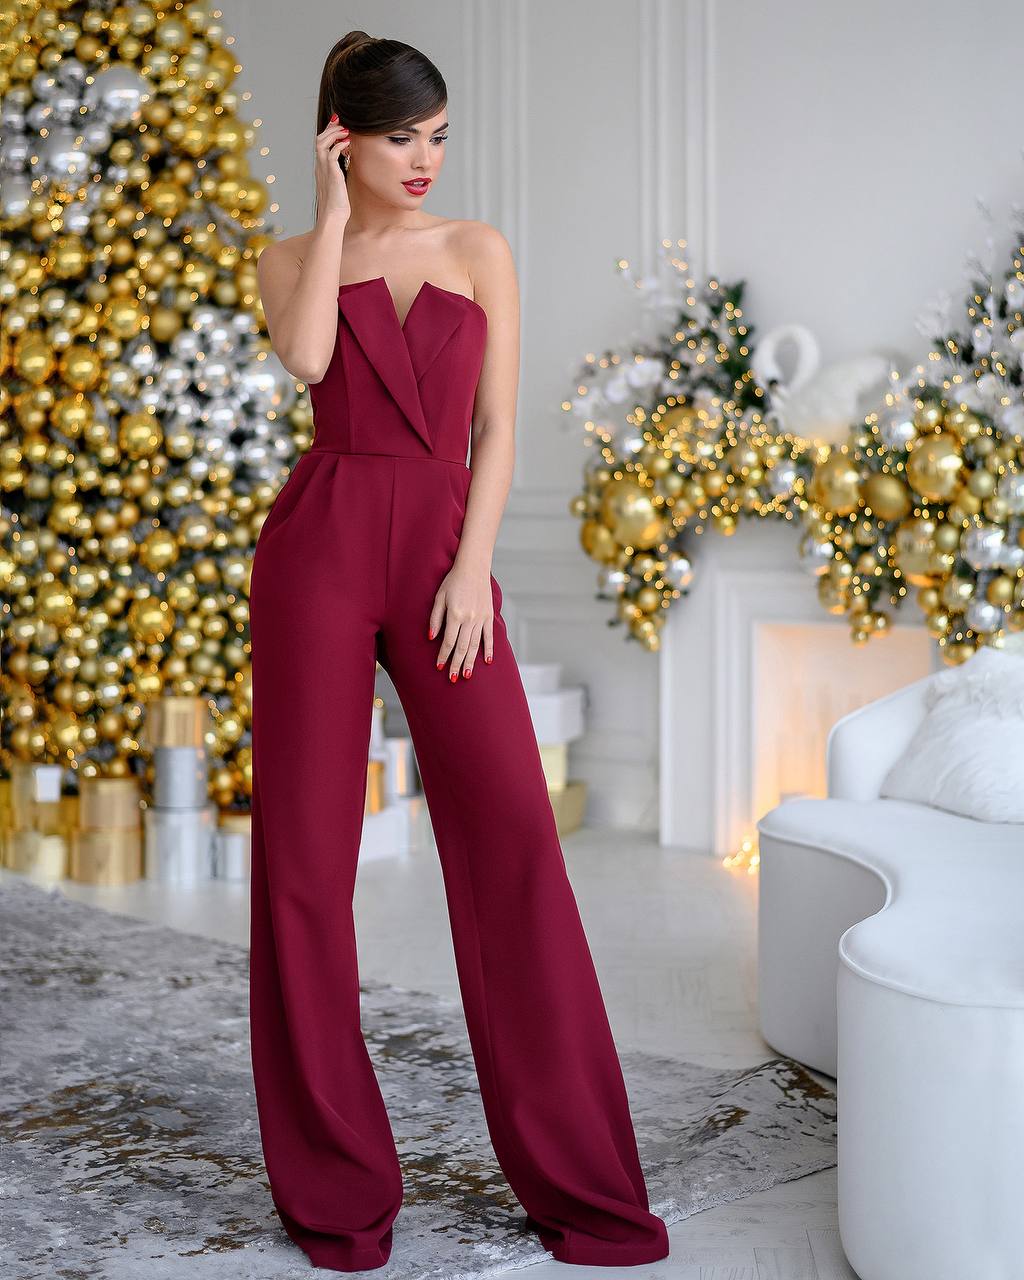 trinarosh Burgundy Corseted And Flare Pants Jumpsuit